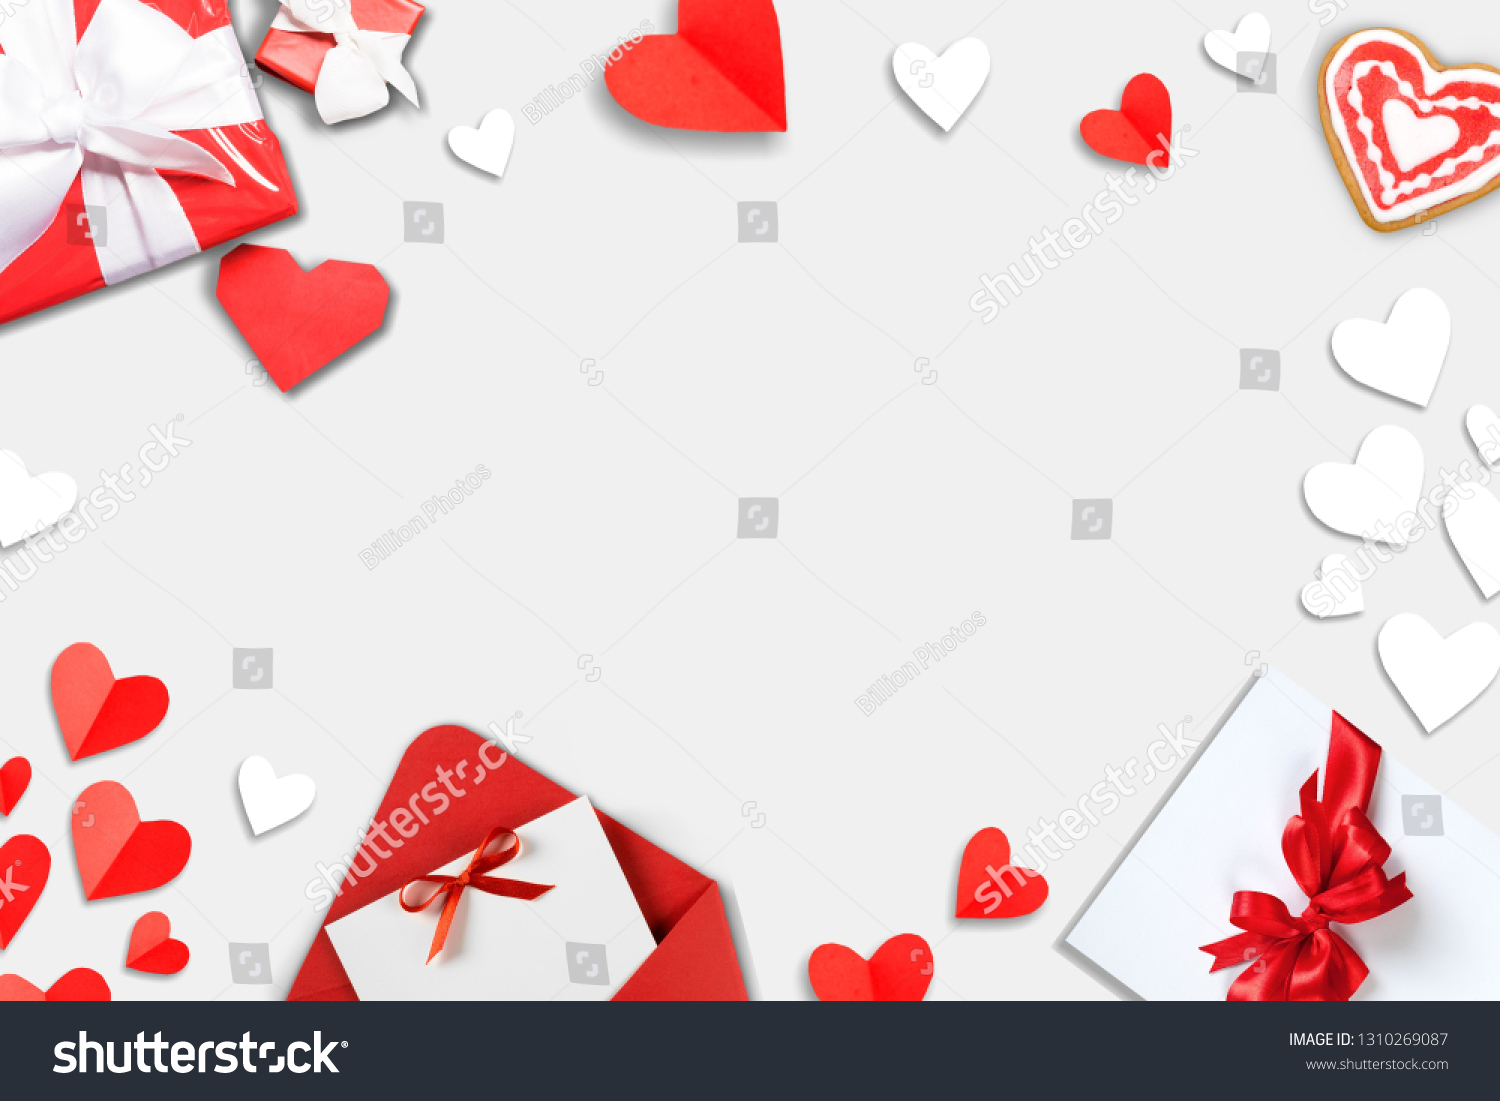 Valentine's Day background. Gifts, candle, confetti, envelope on pastel blue background. Valentines day concept. Flat lay, top view, copy space
    
    - Image #1310269087